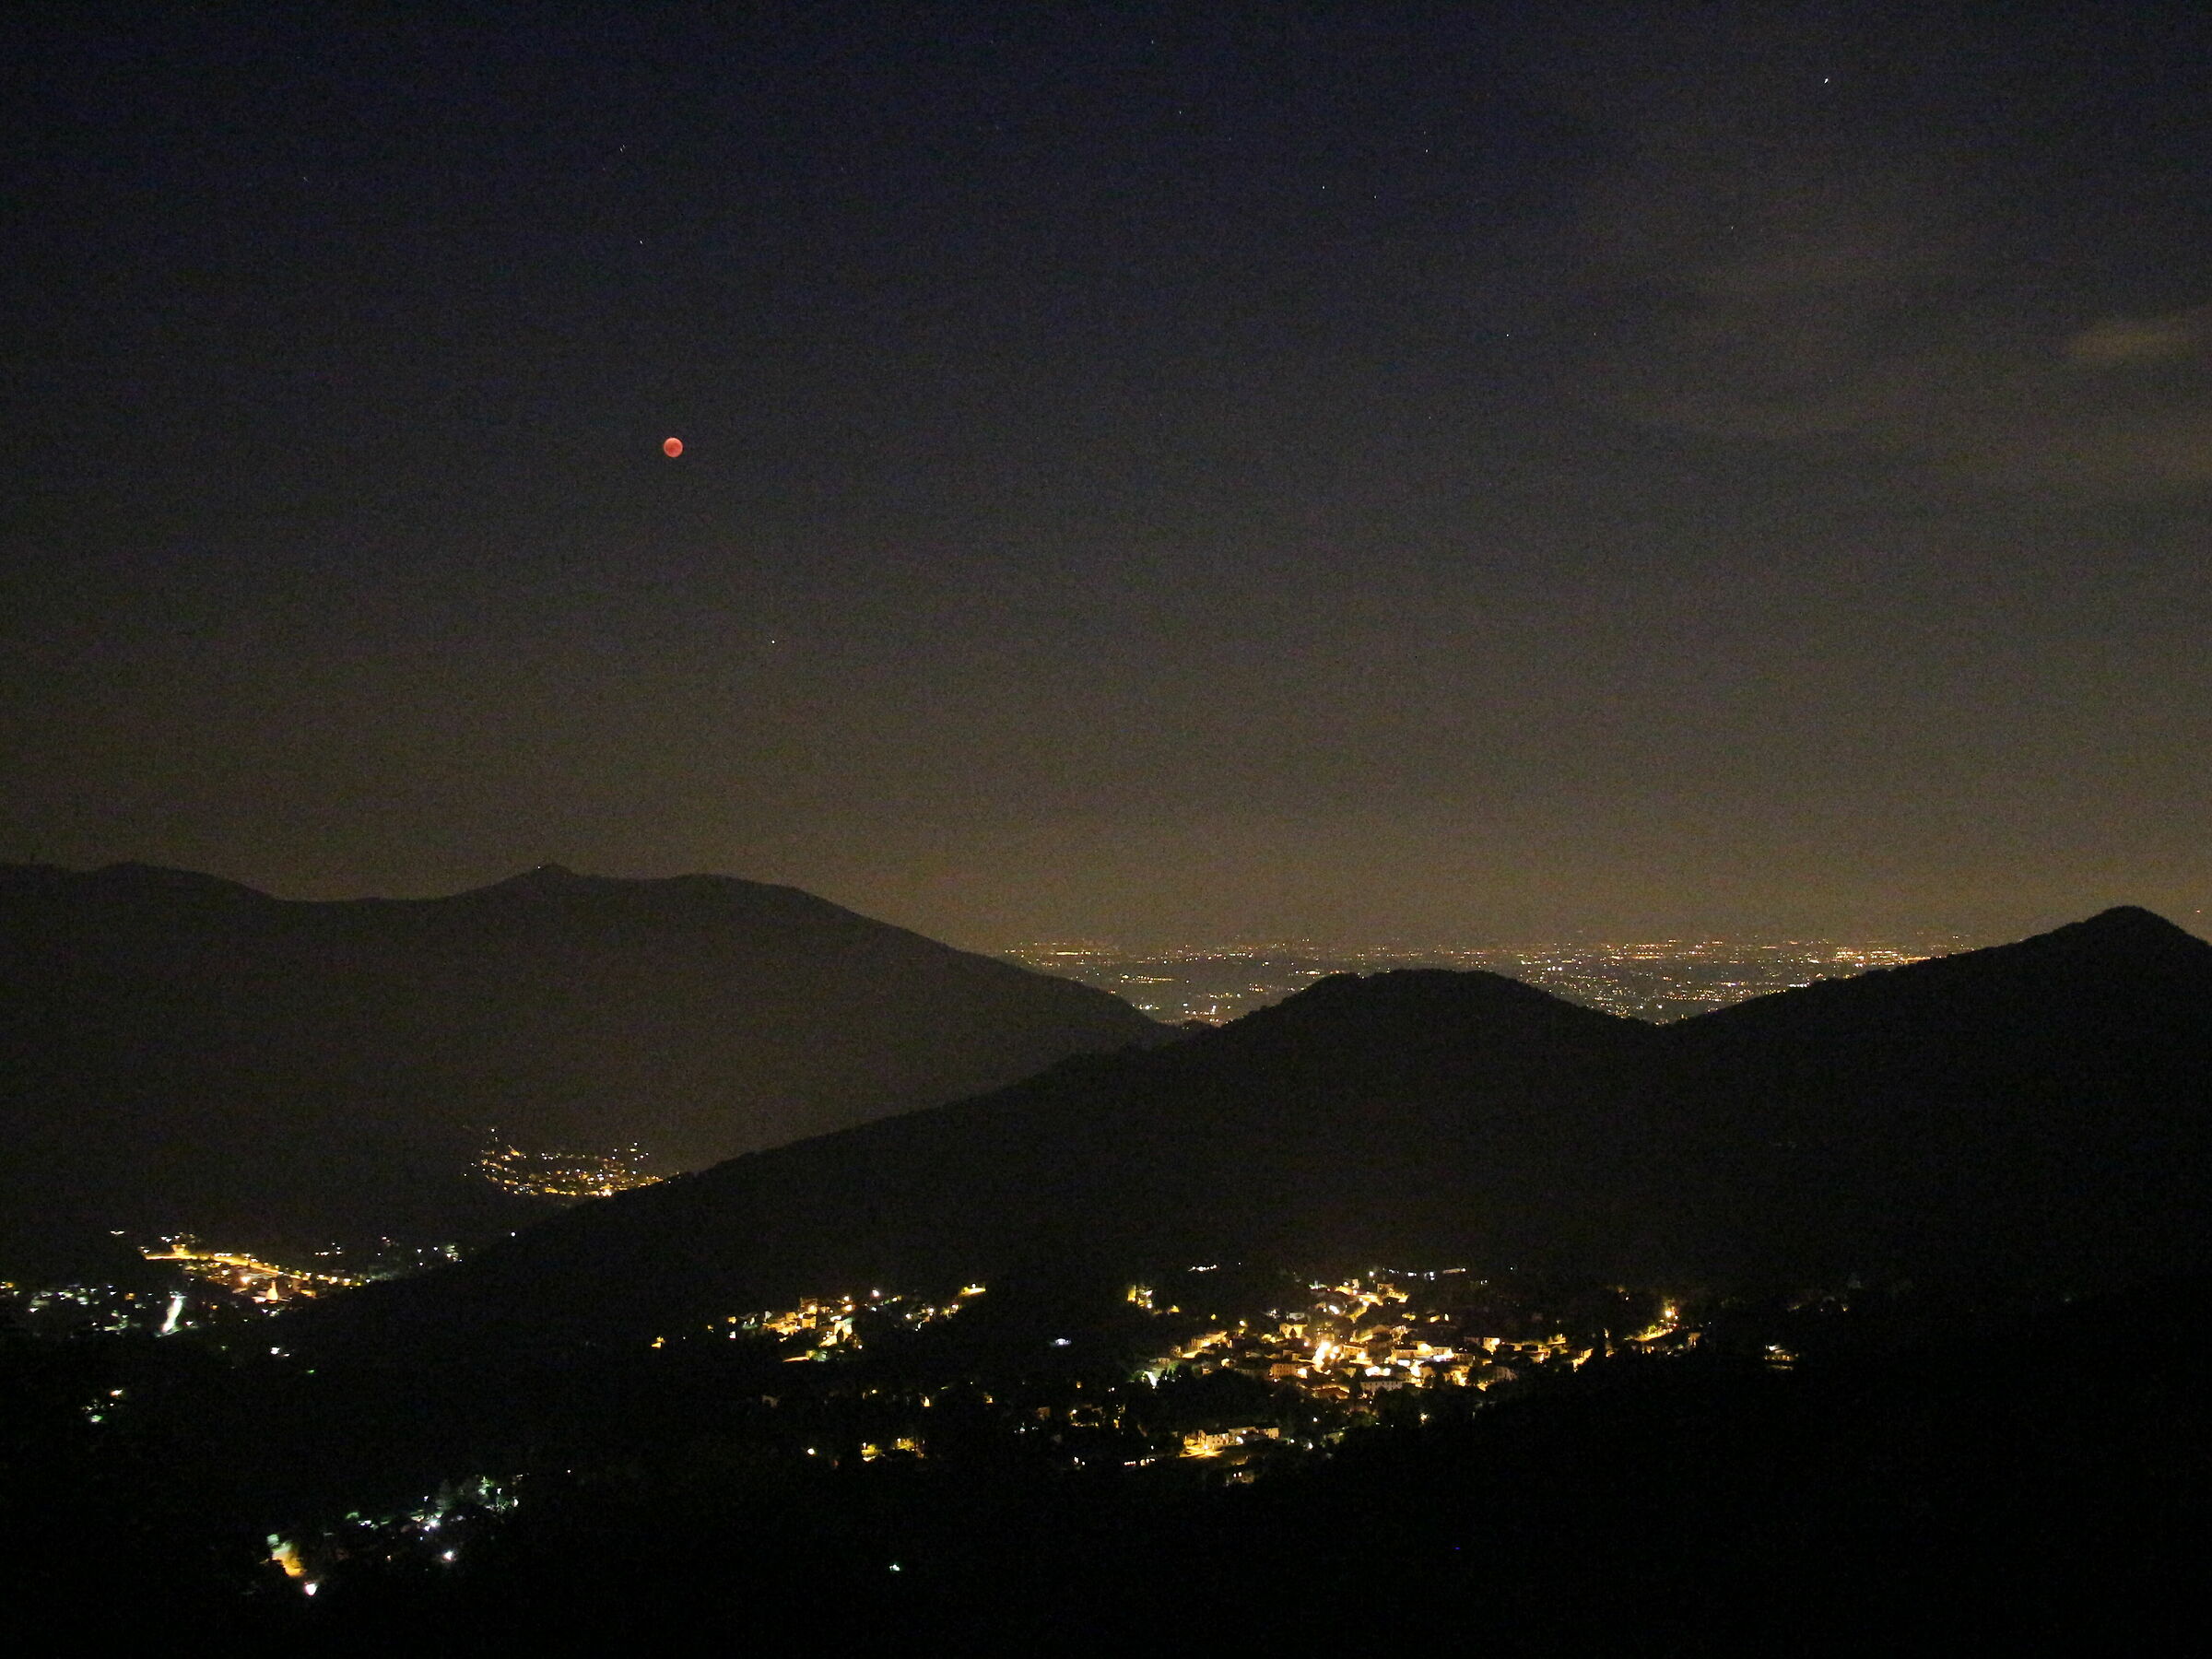 Partial eclipse of moon 27/07/2018-Panorama from Sormano...